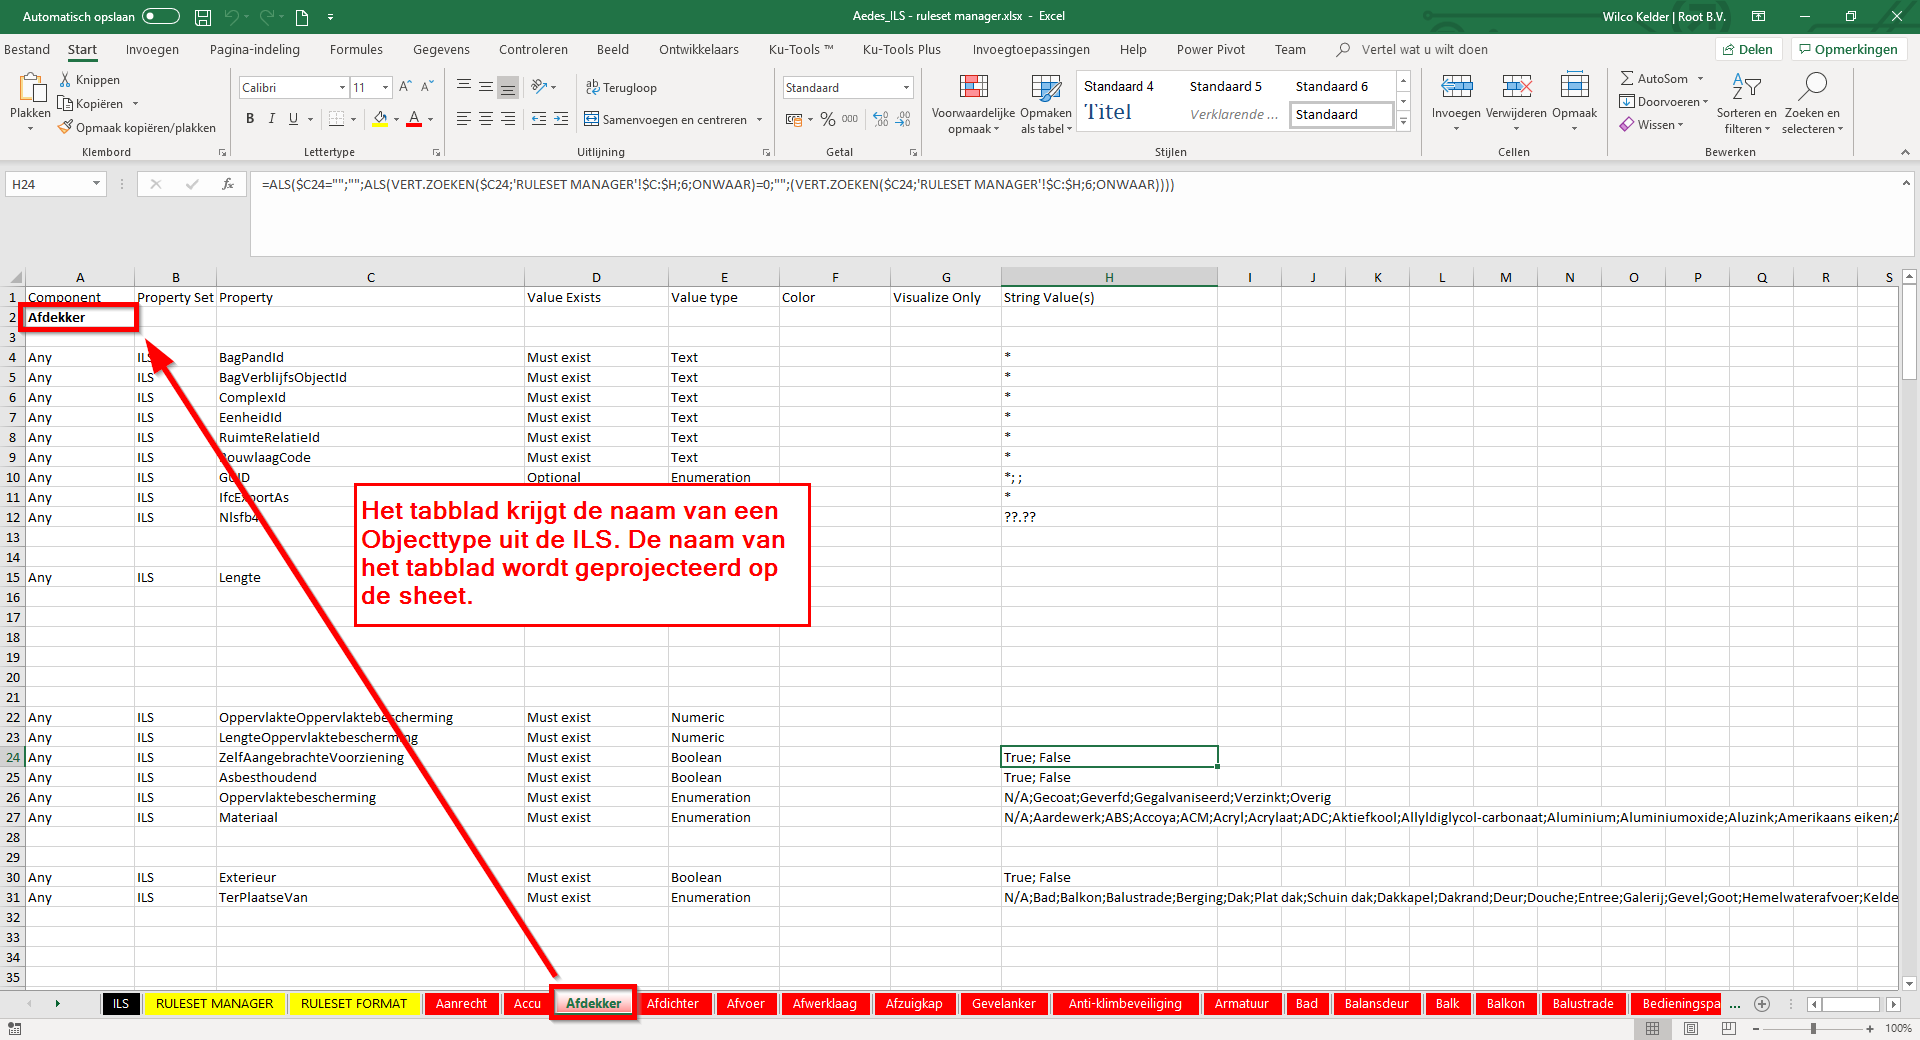 ruleset manager excel-objecttype